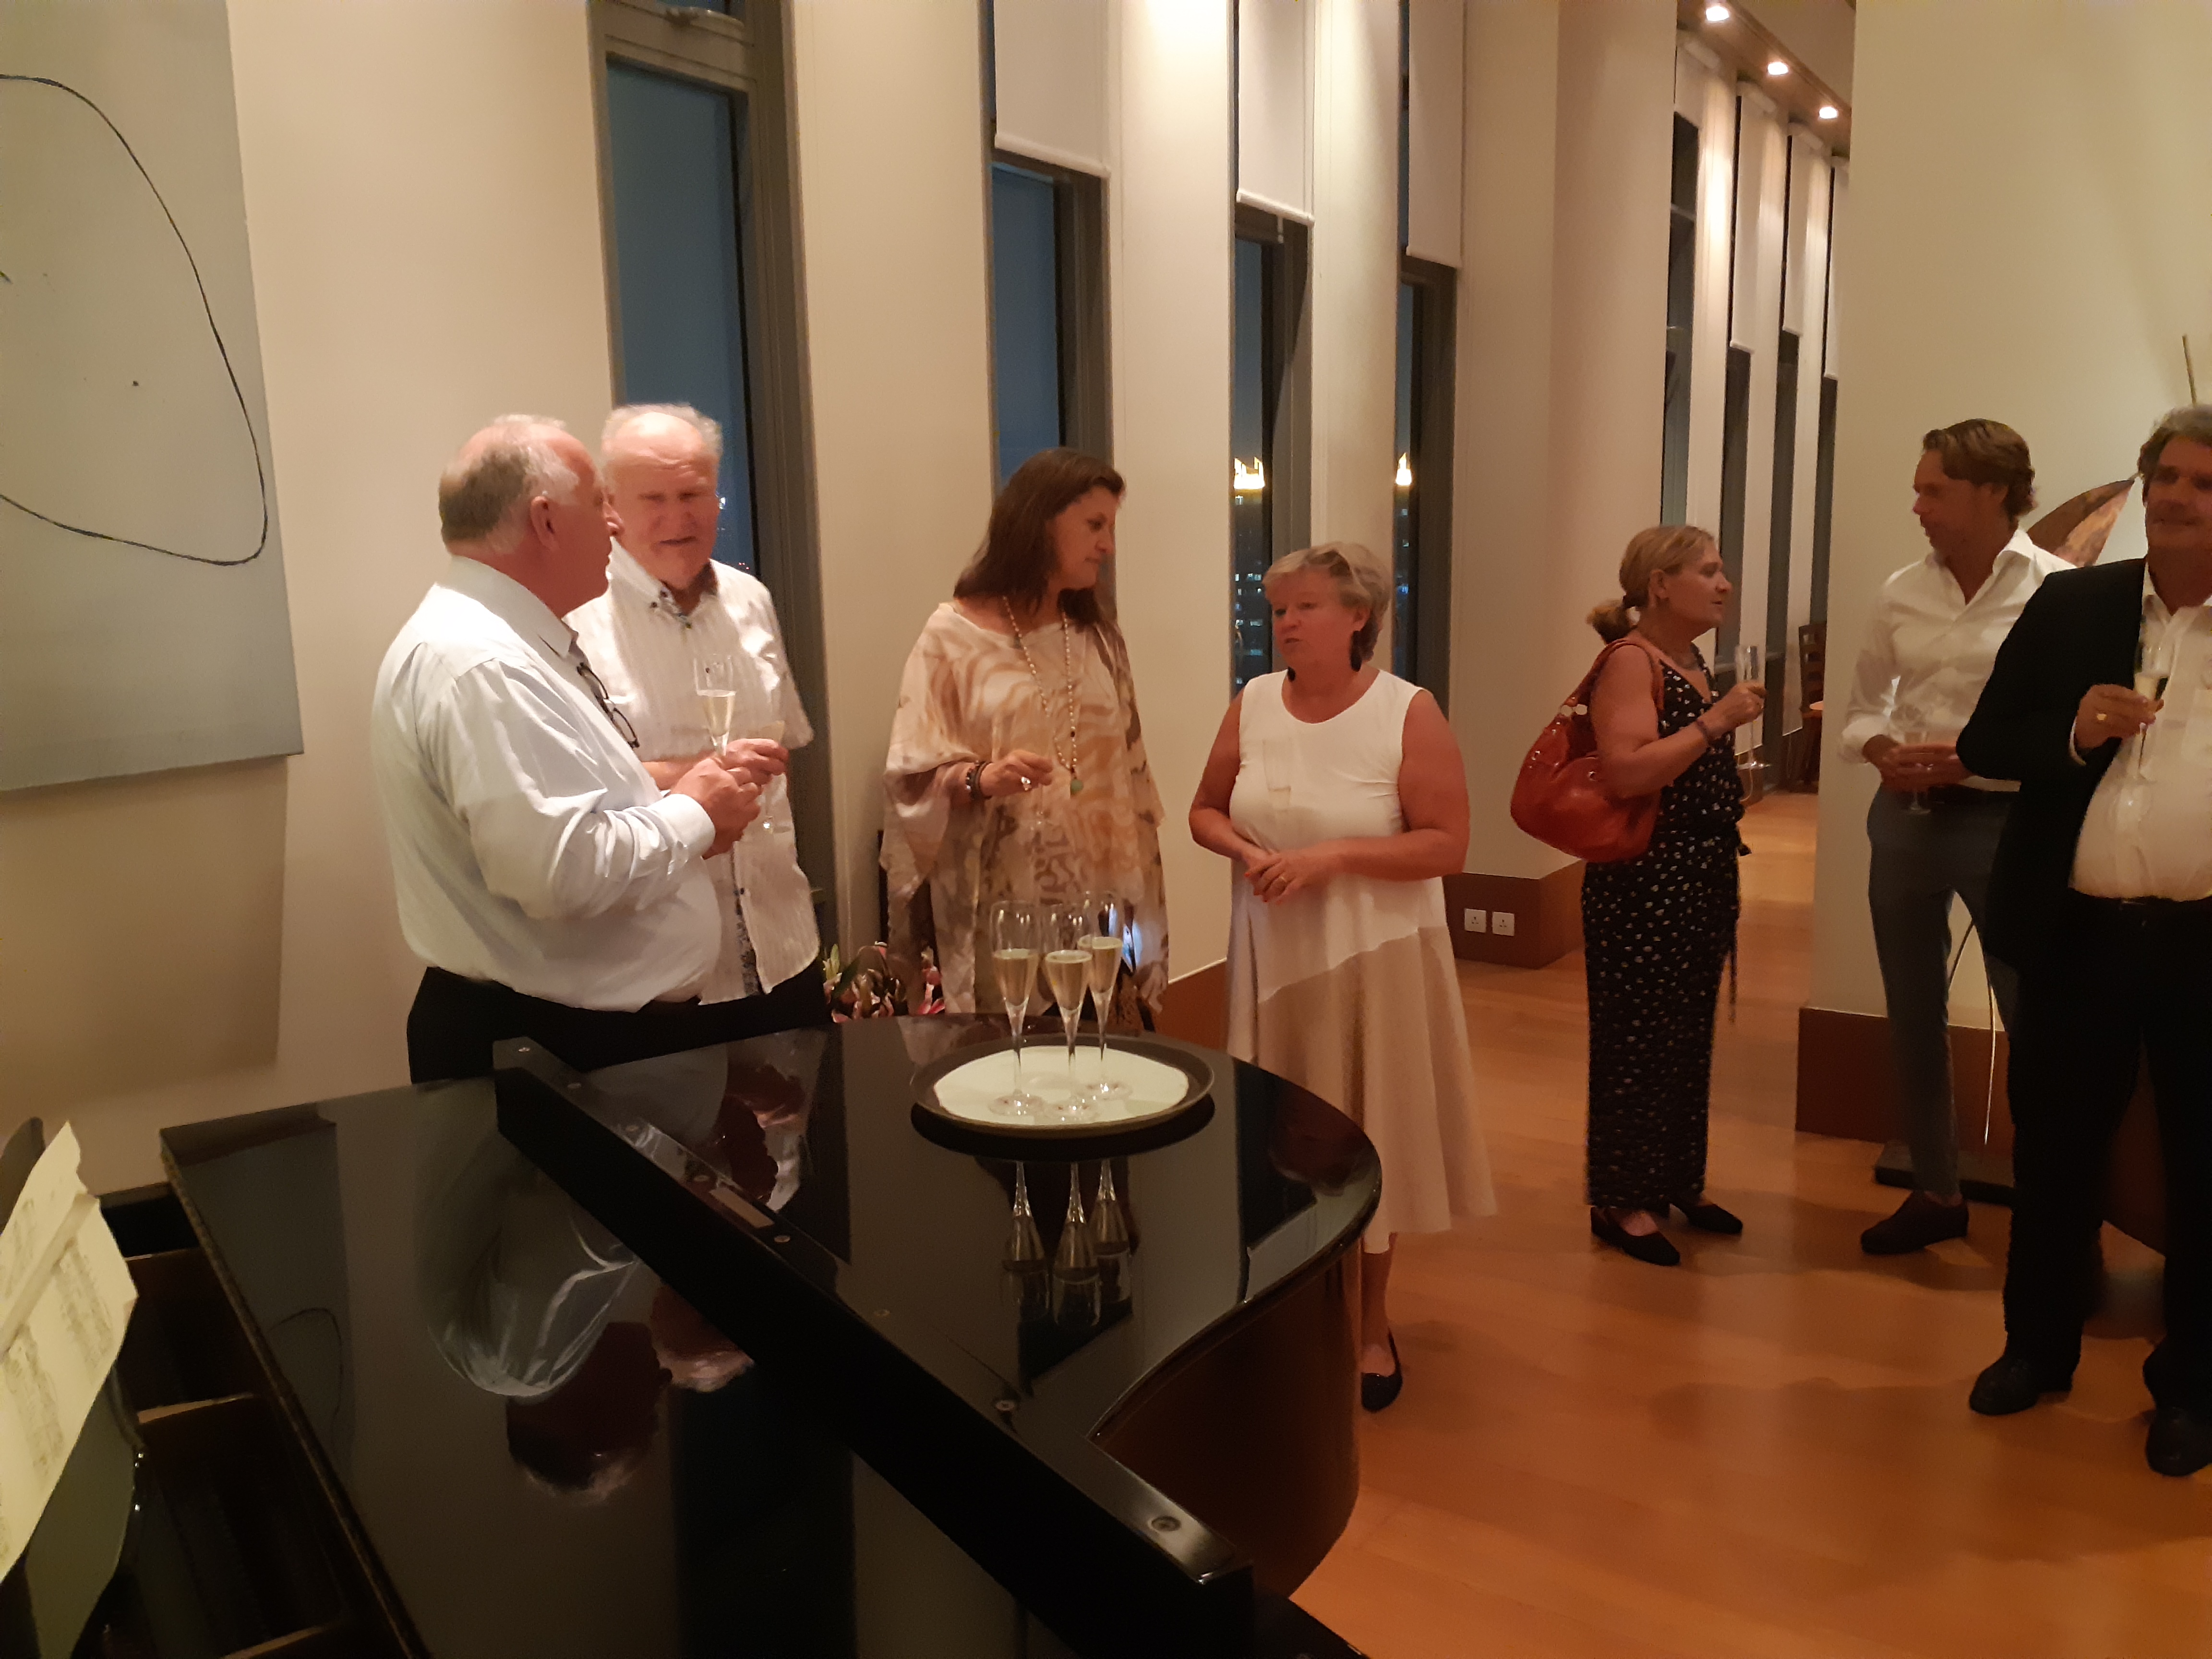 SWEA tasting Luxembourg wines at the residence of the Luxembourg ambassador